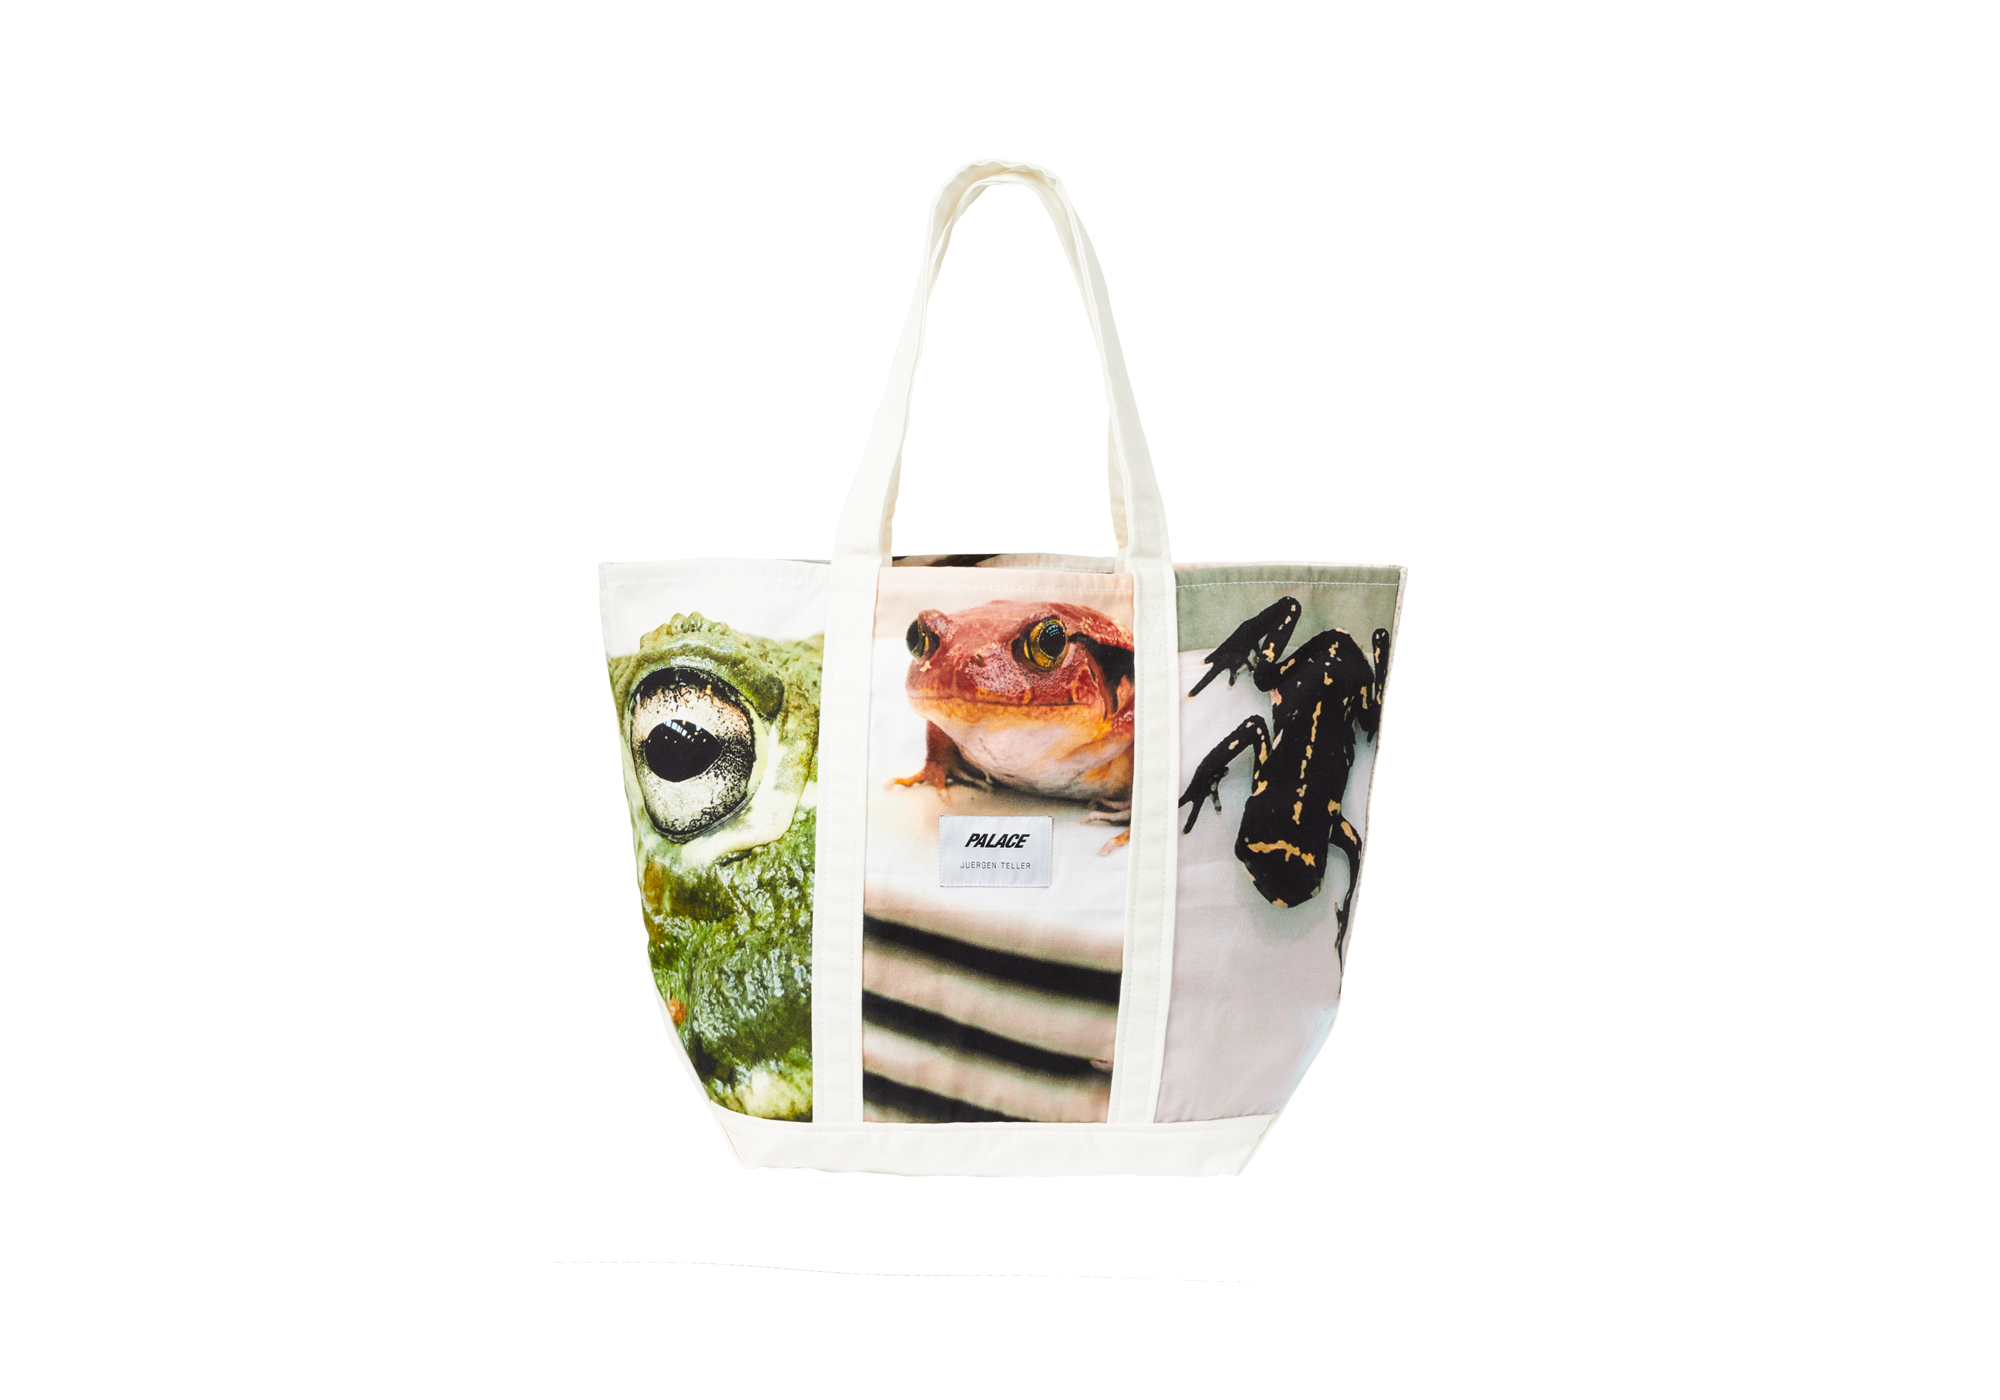 Palace_Spring_frog_tote_2181